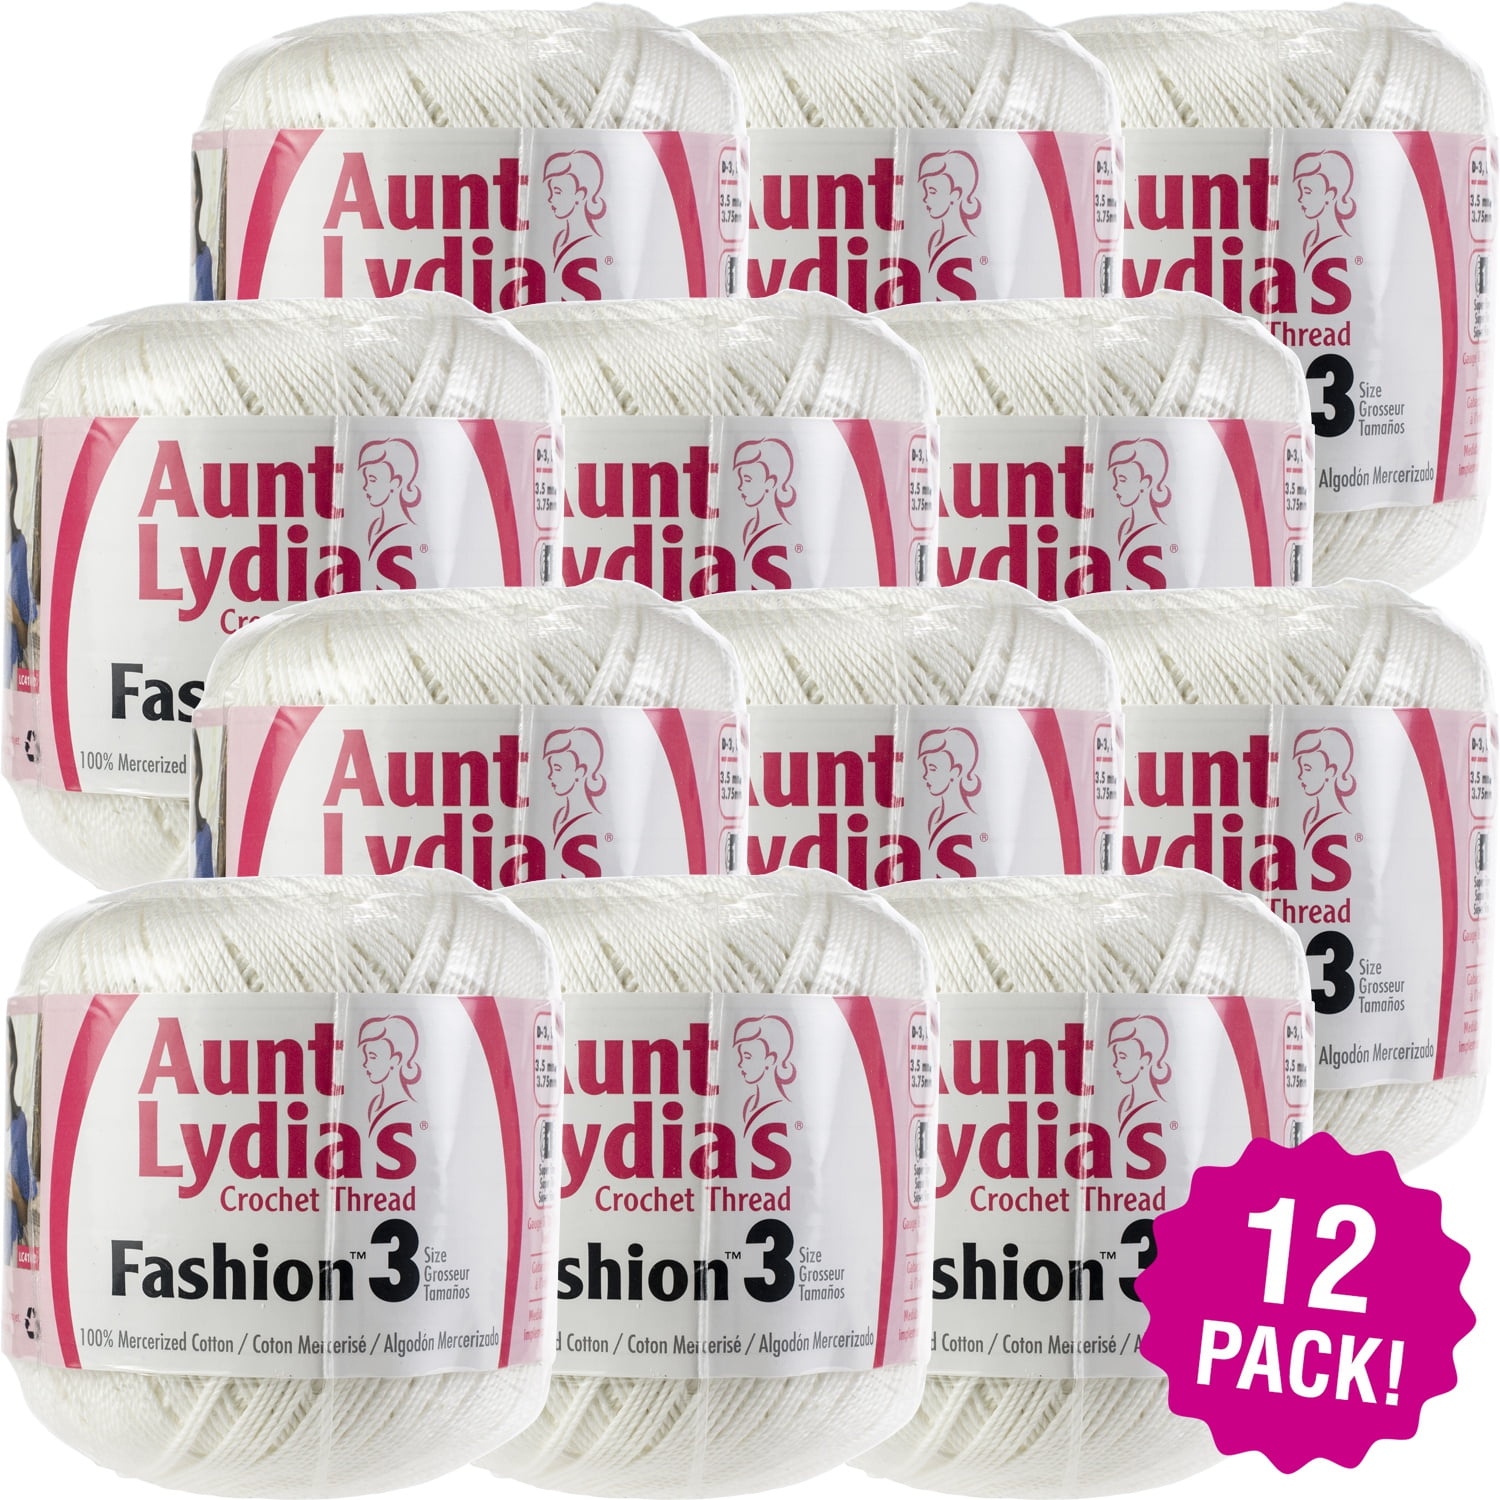 Multipack of 12 - Aunt Lydia's Fashion Crochet Thread Size 3